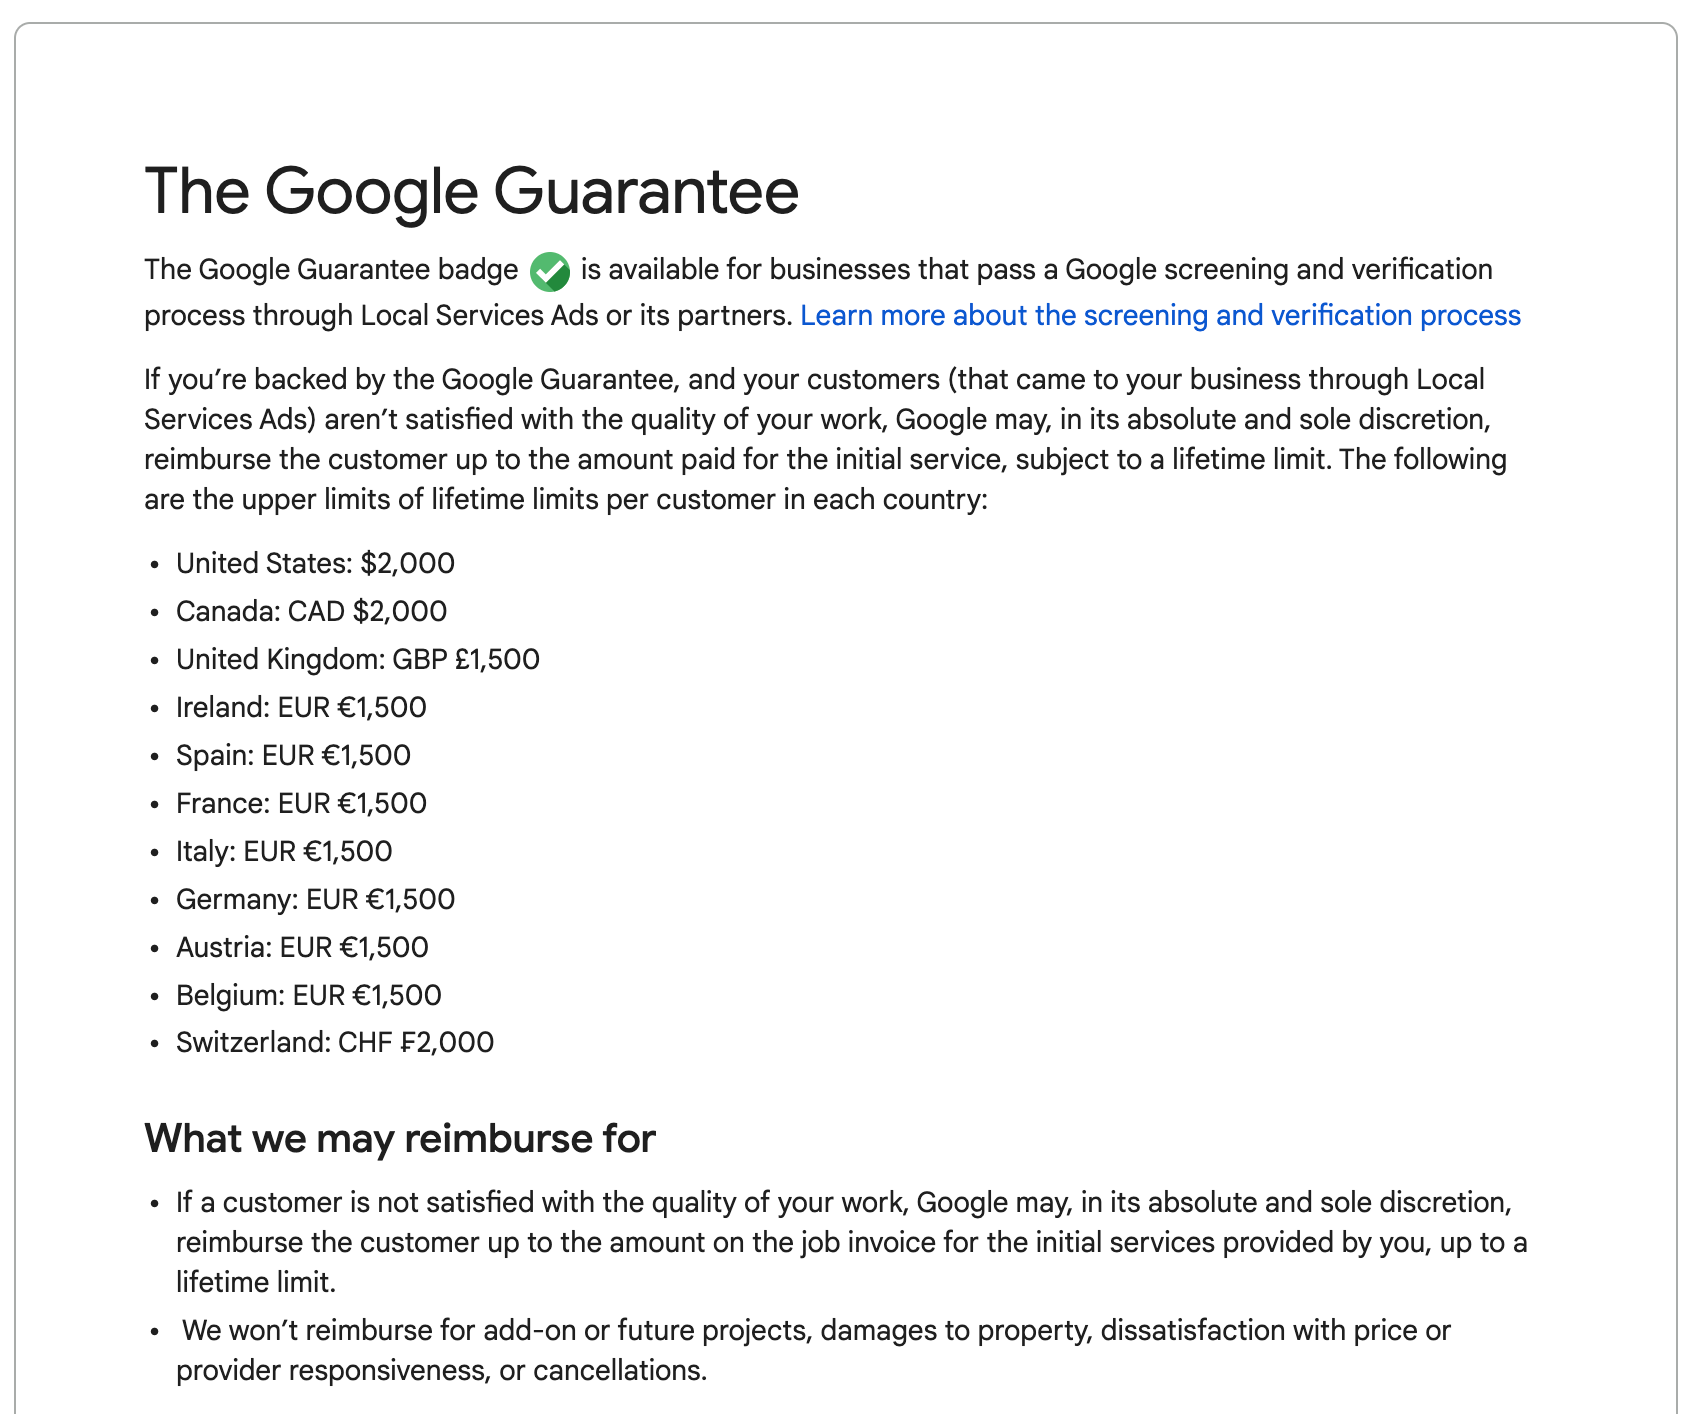 agencyjet - The-Google-Guarantee-Local-Services-Help